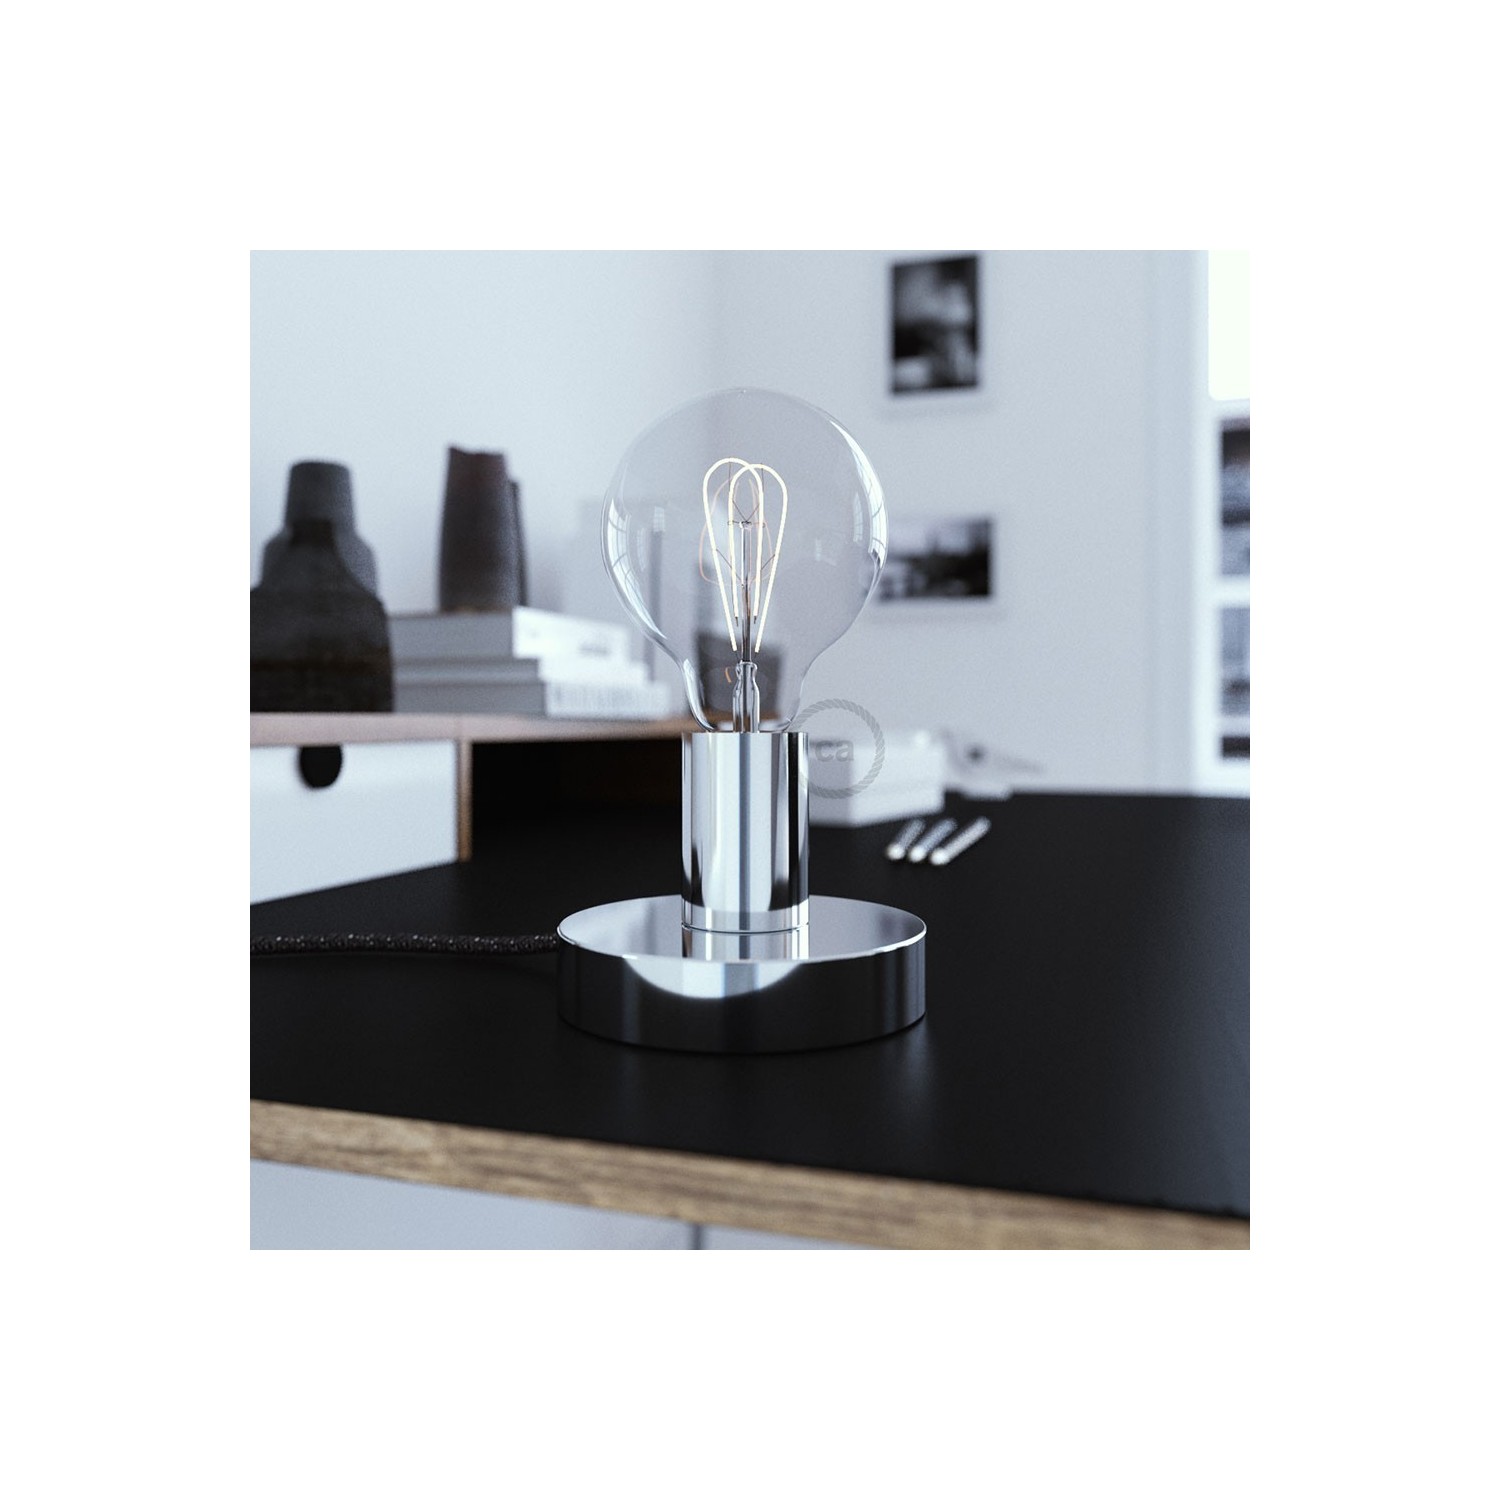 Posaluce, the chrome metal table lamp, with textile cable, in-line switch and english plug